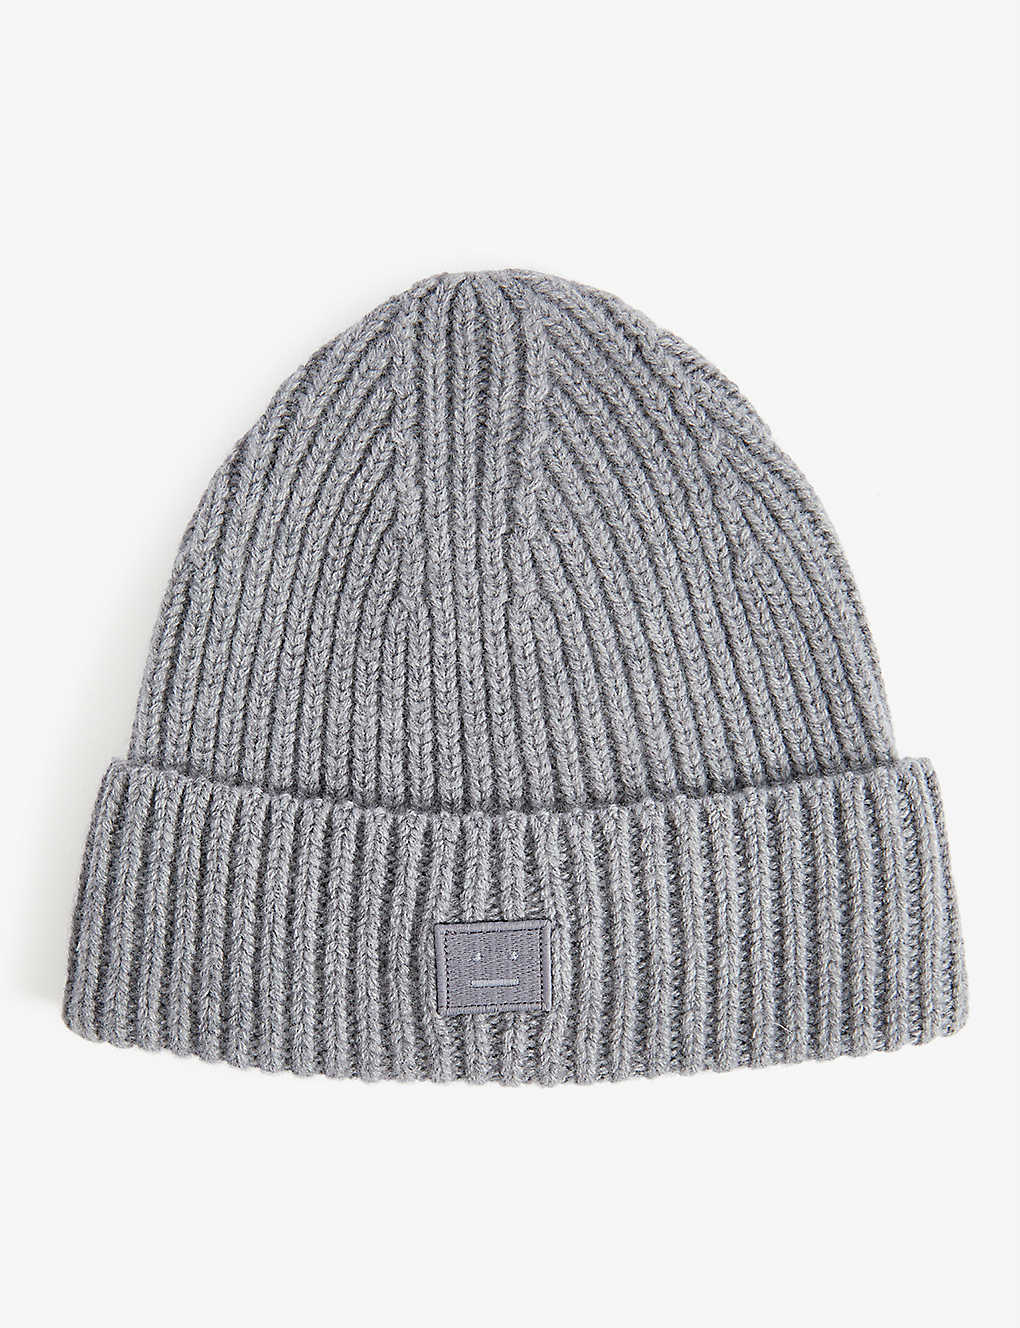 Selfridges & Co Boys Accessories Headwear Beanies Embroidered-face wool beanie hat 8-10 years 